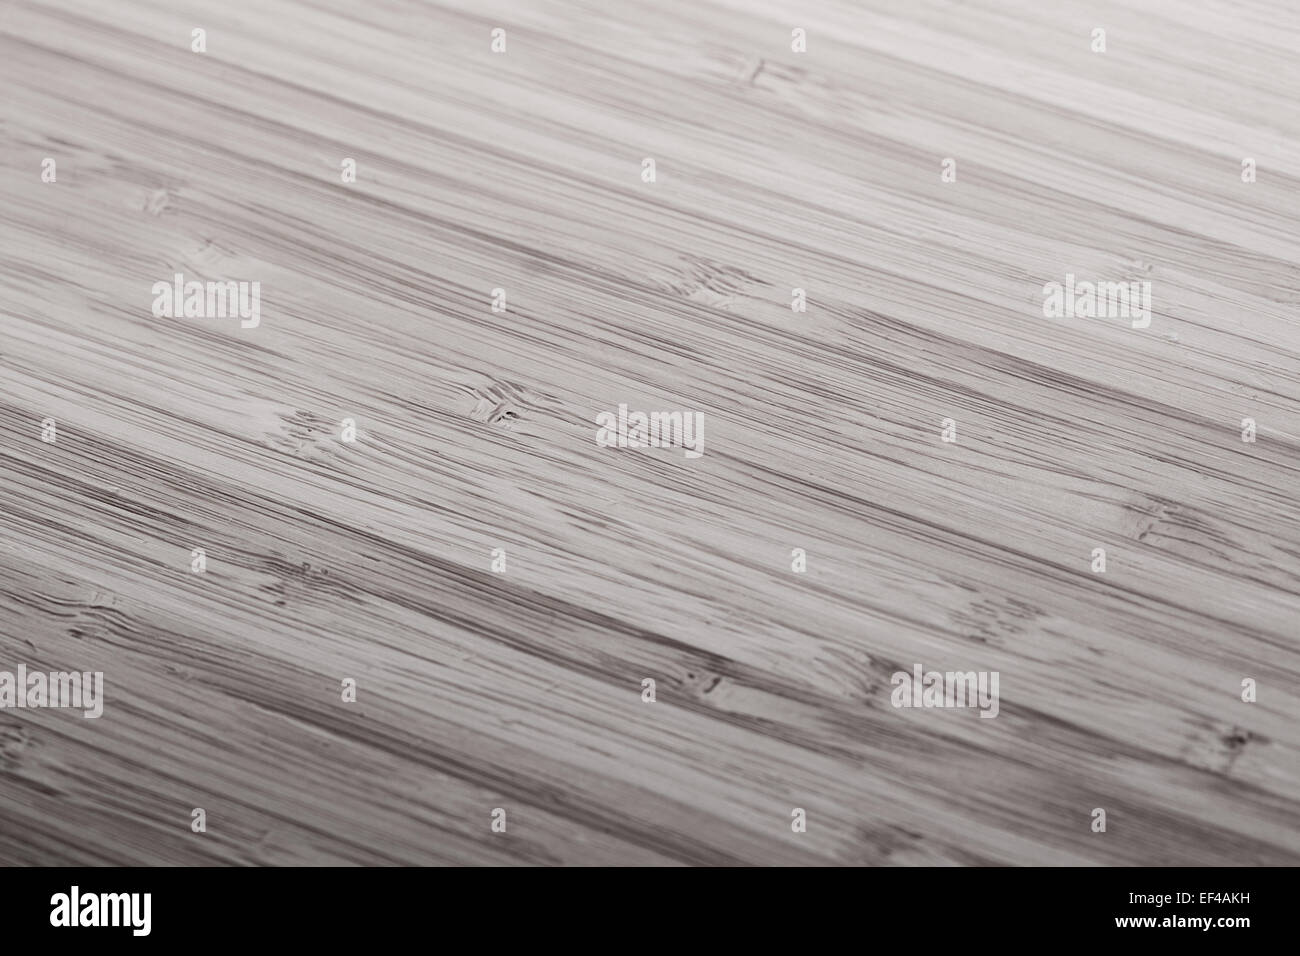 New wooden plank abstract background. Stock Photo